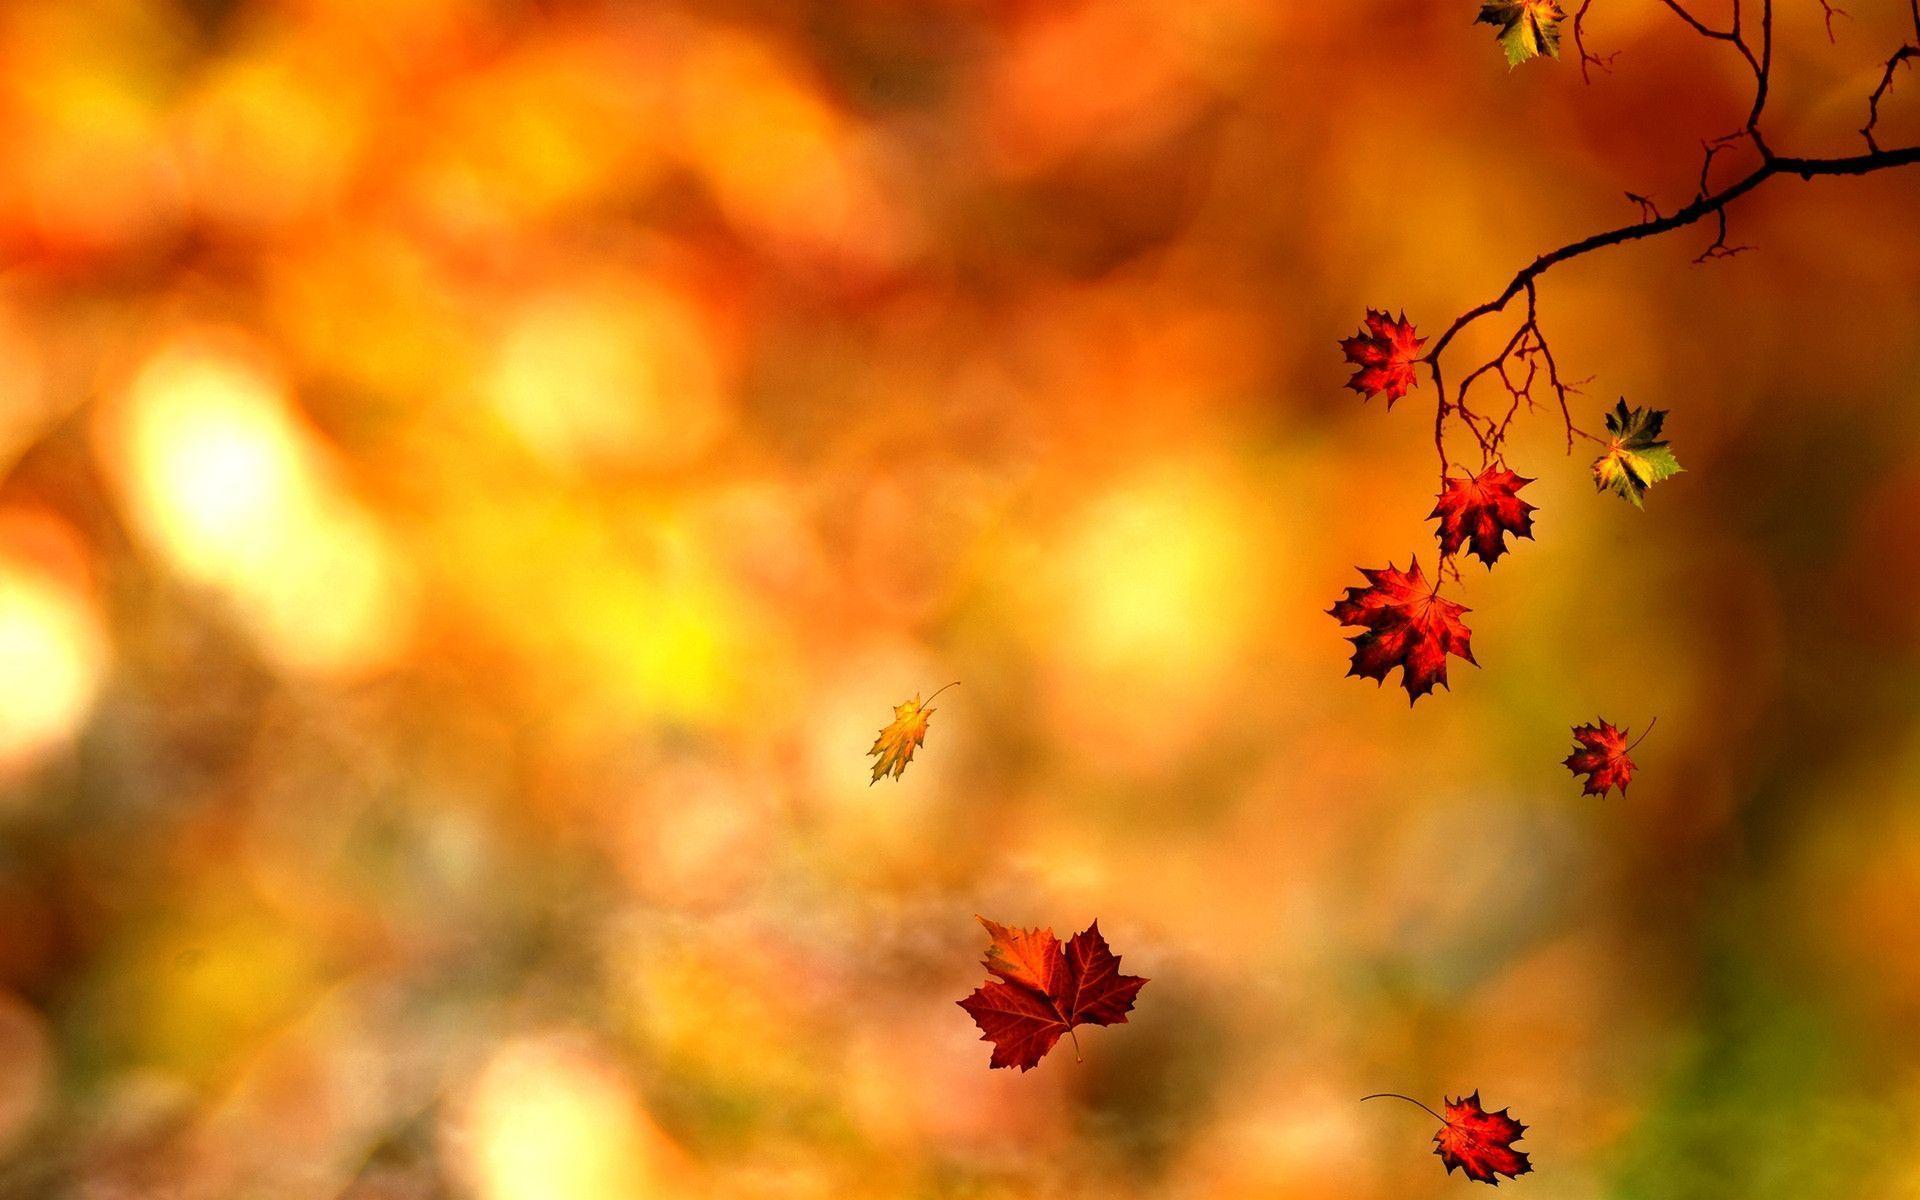 Awesome Autumn Leaf Wallpaper PC 064 Wallpaper. Wallpaper